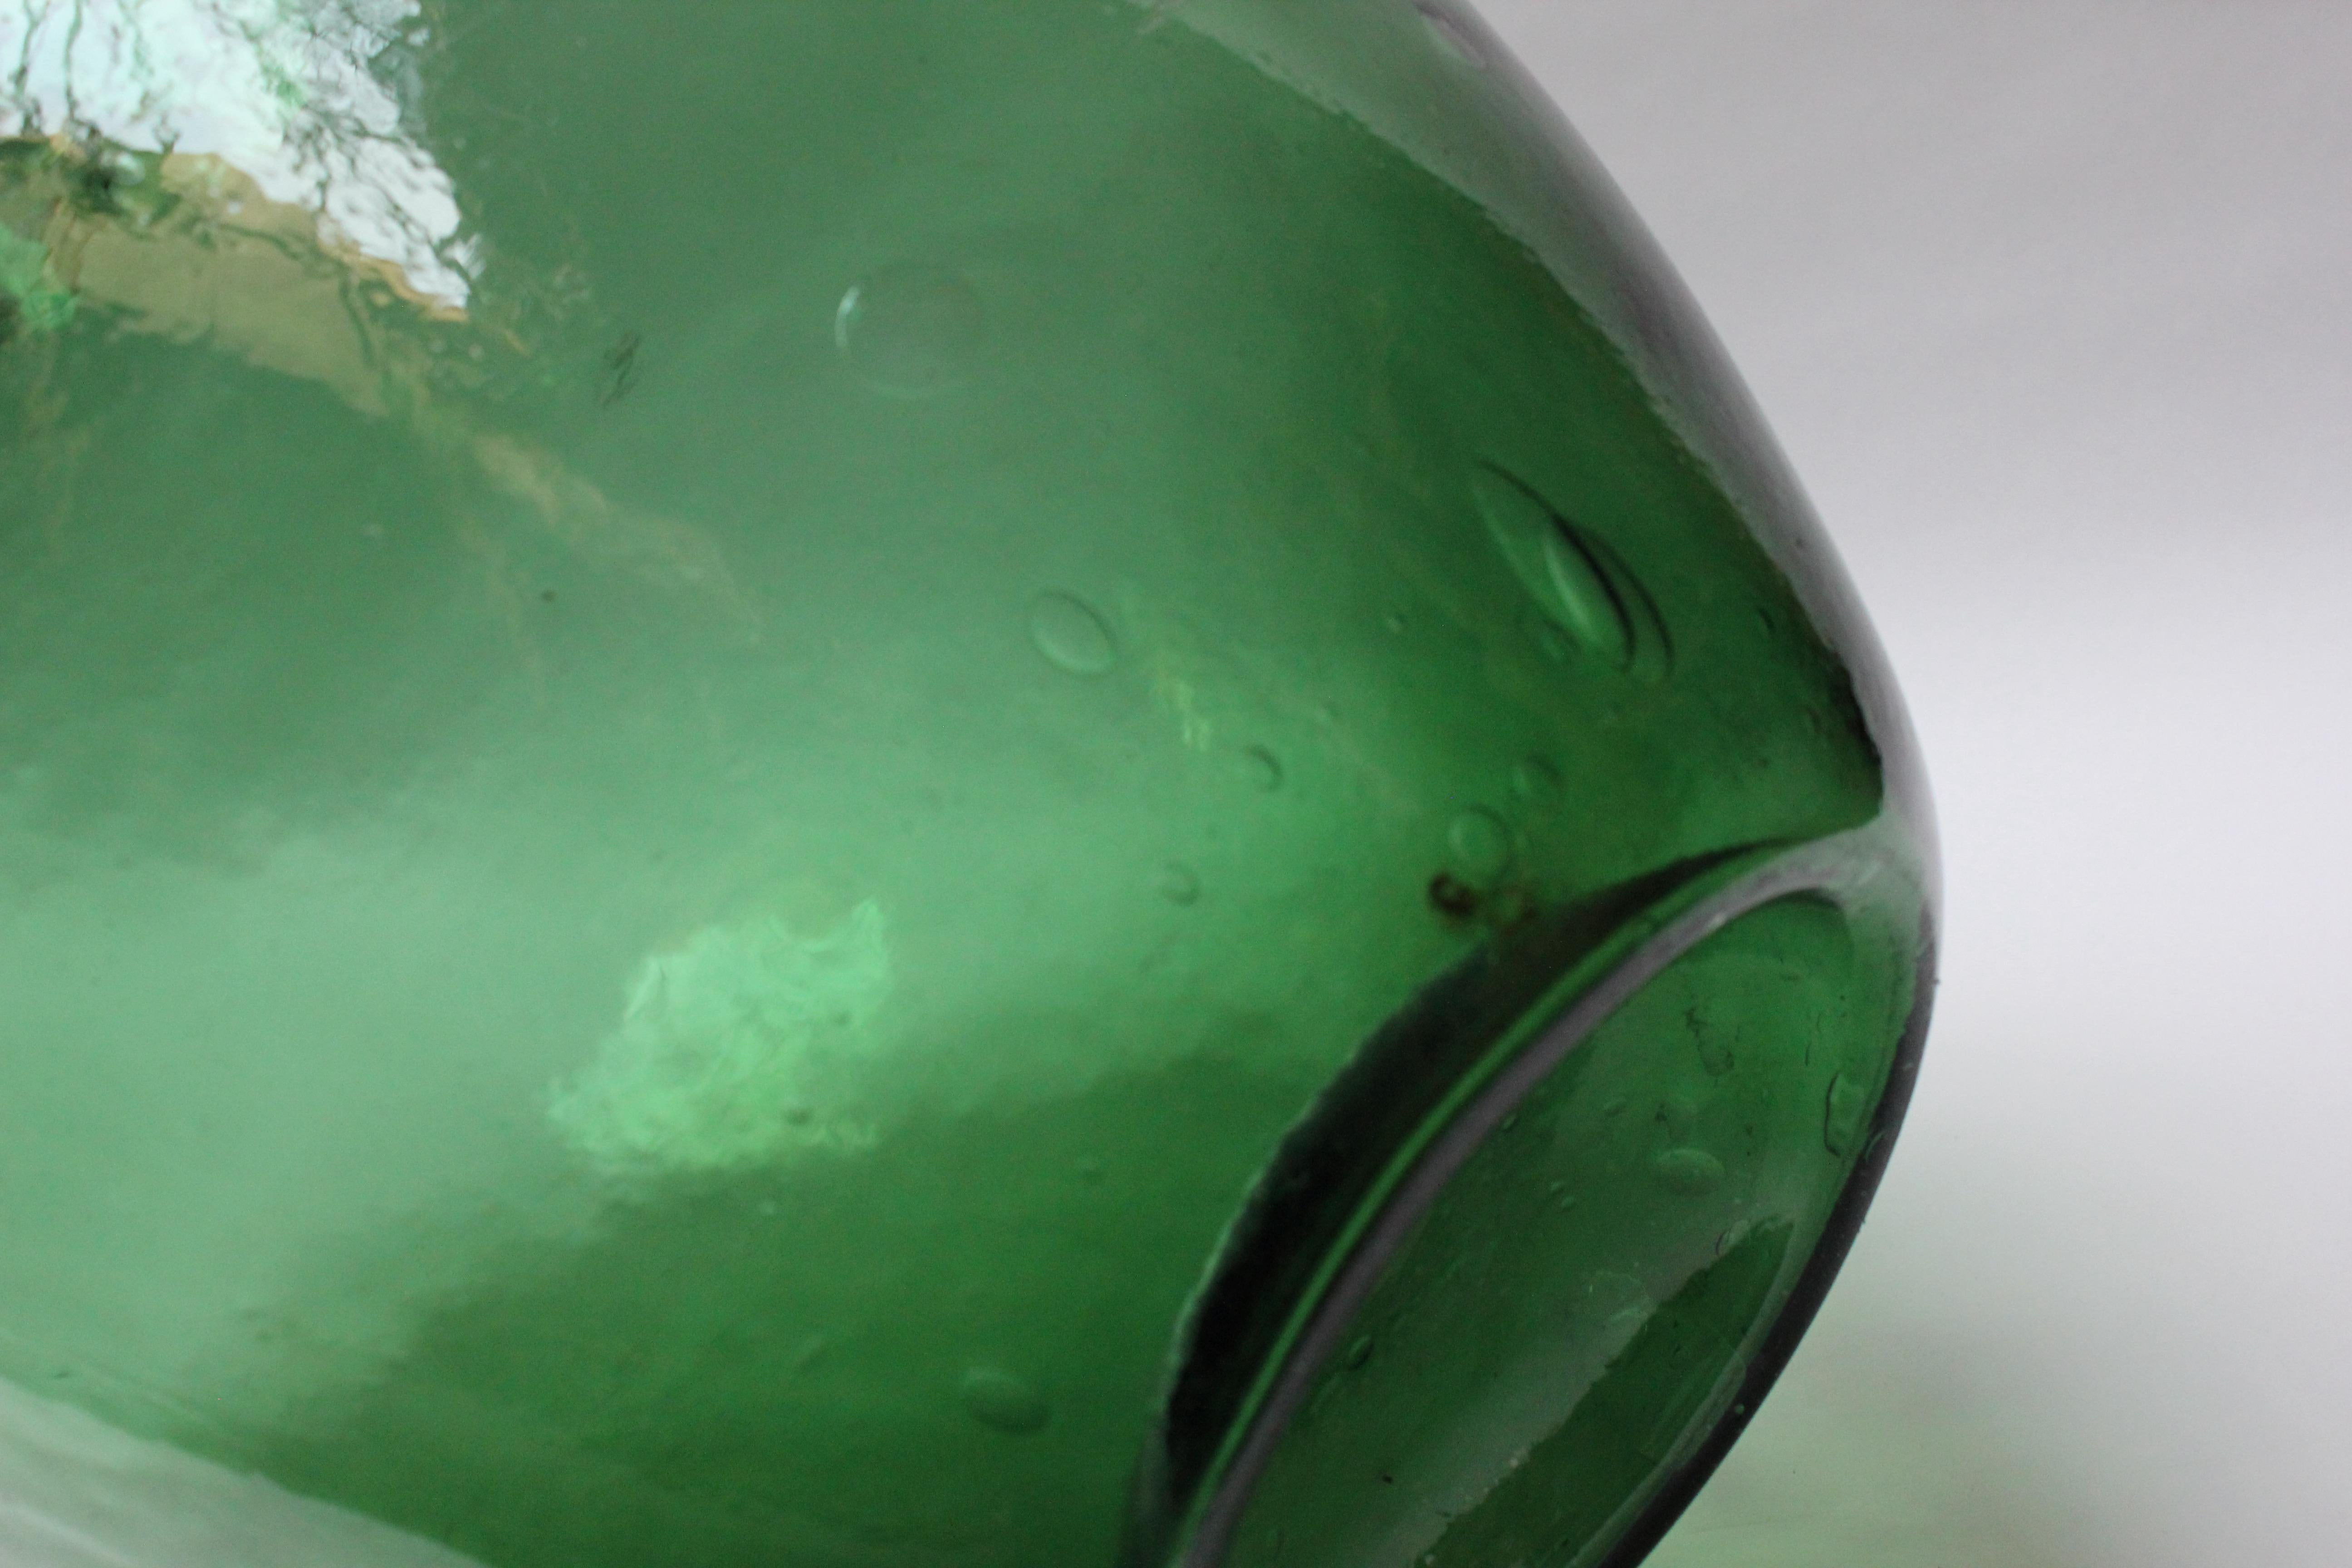 19th Century Antique Mouth Blown Glass Bulbous Demijohn in Emerald Green